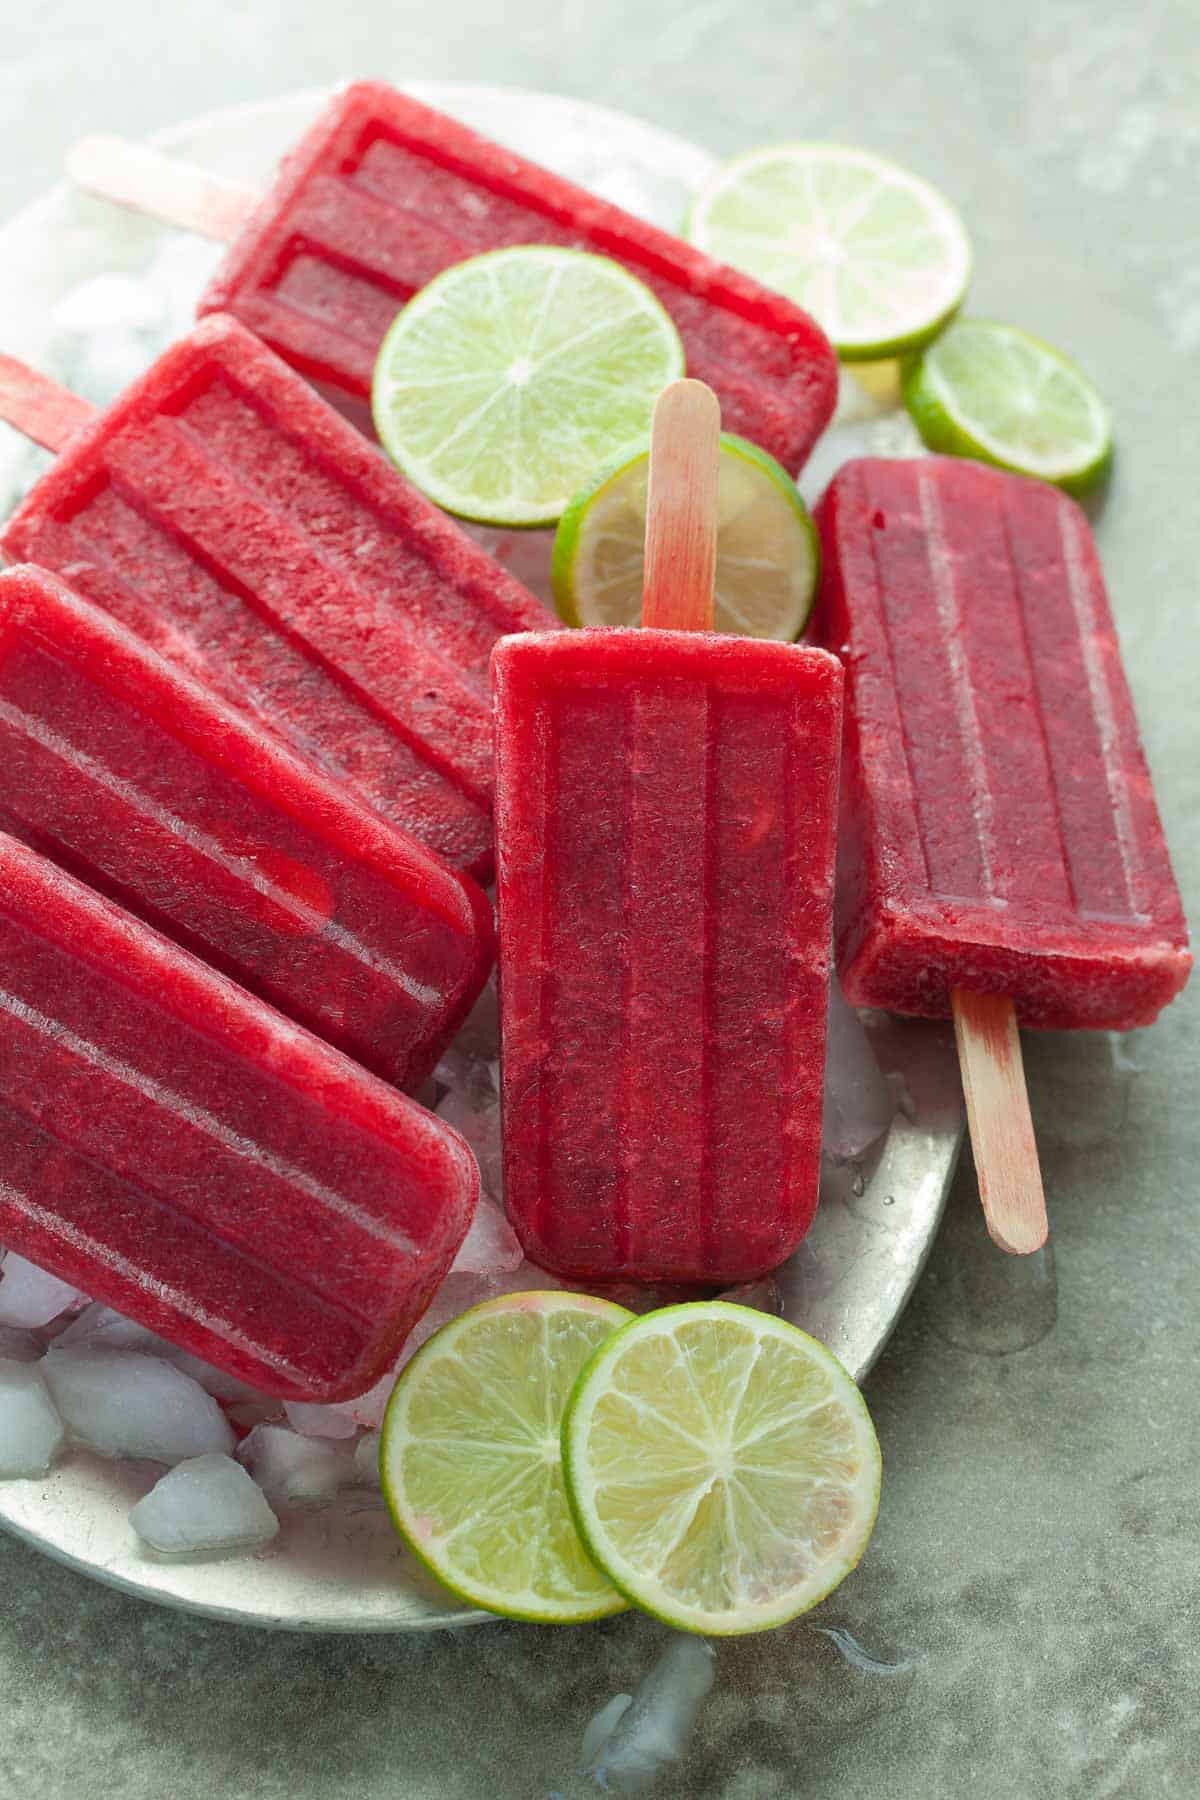 Cherry Lime Popsicles over Ice on Plate